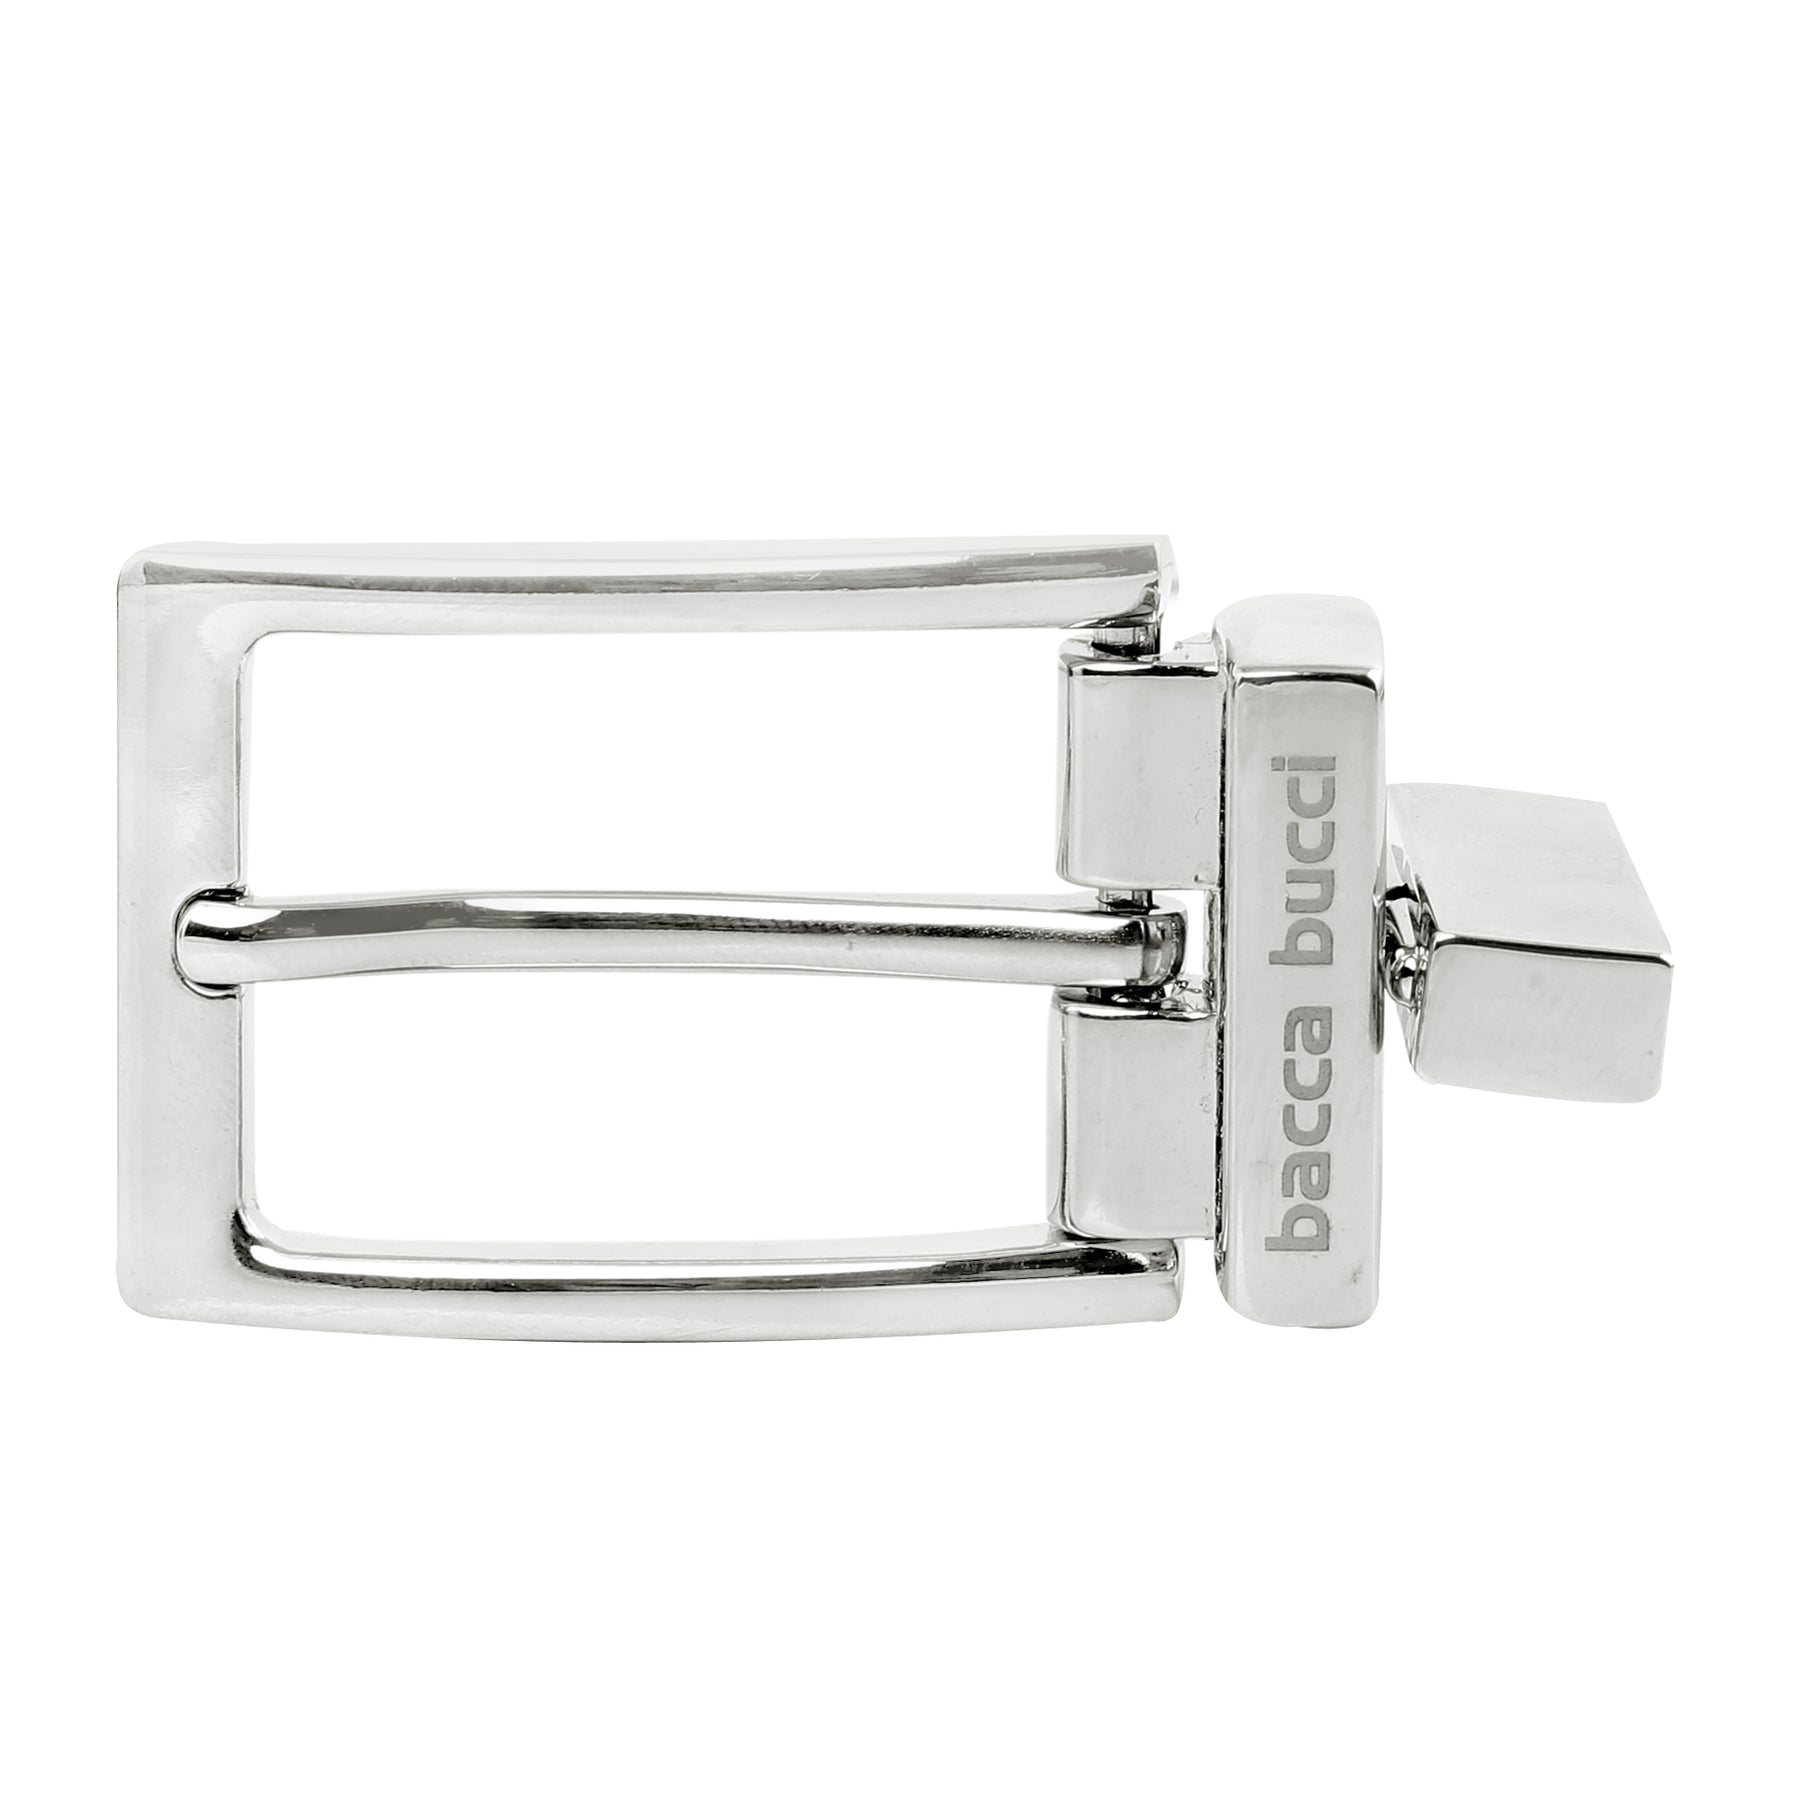 Bacca Bucci Men's 35MM  Nickle-Free Reversible Clamp Belt Buckle with Branding